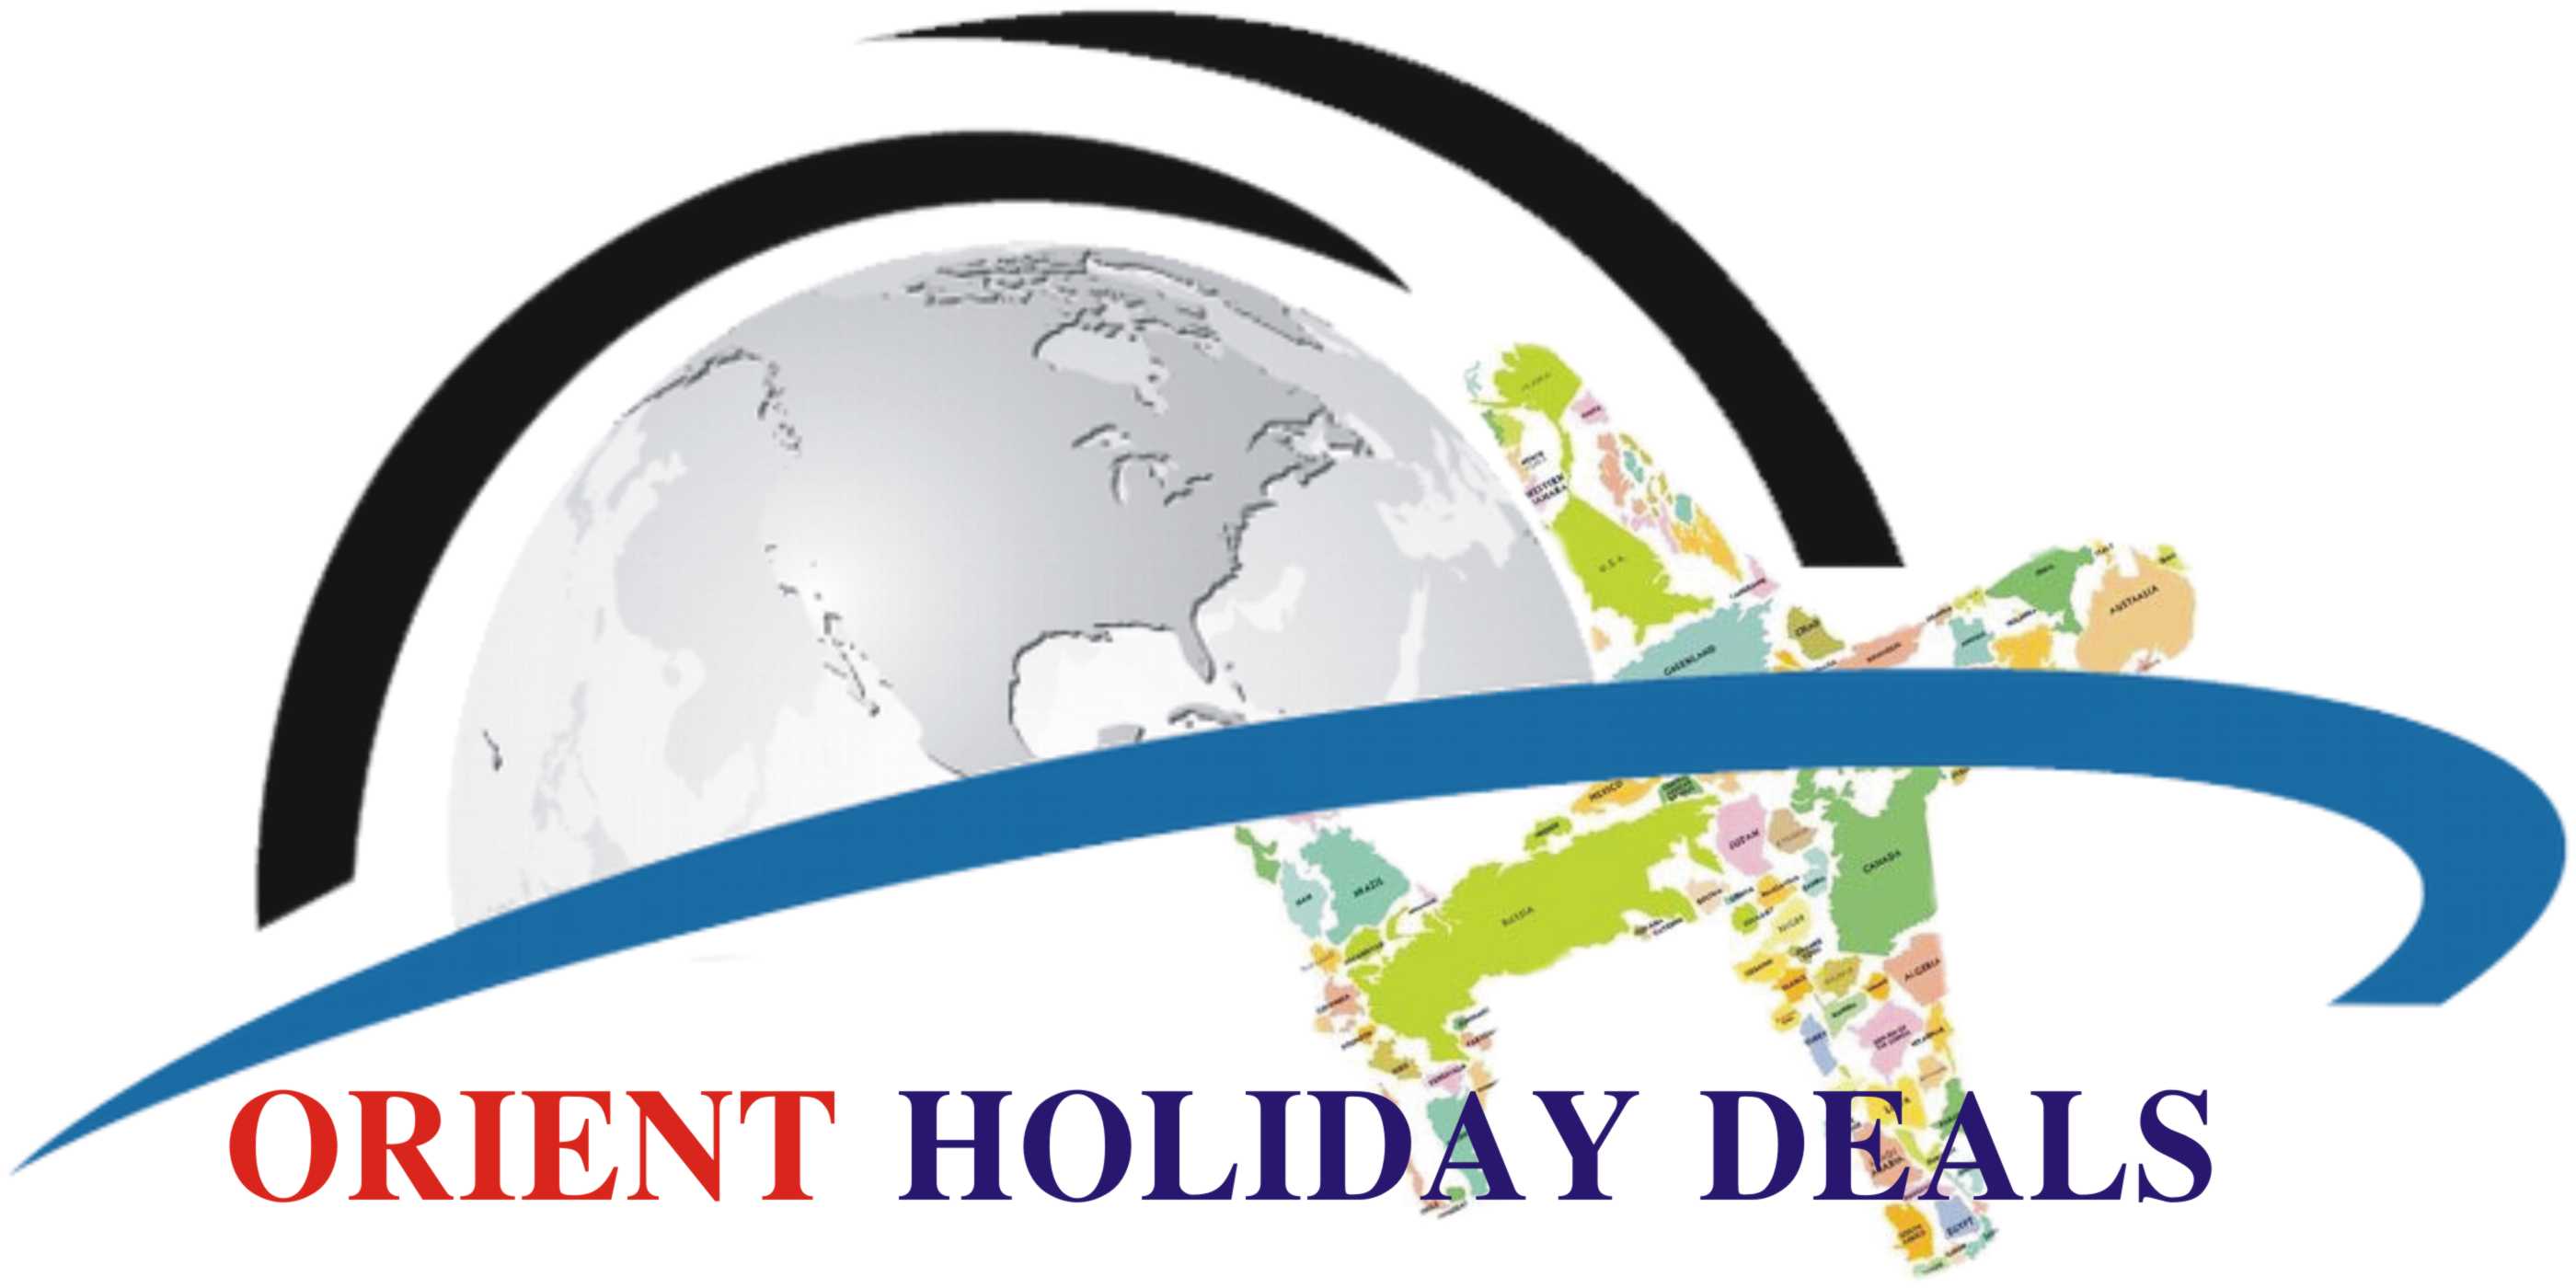 ORIENT HOLIDAY DEALS